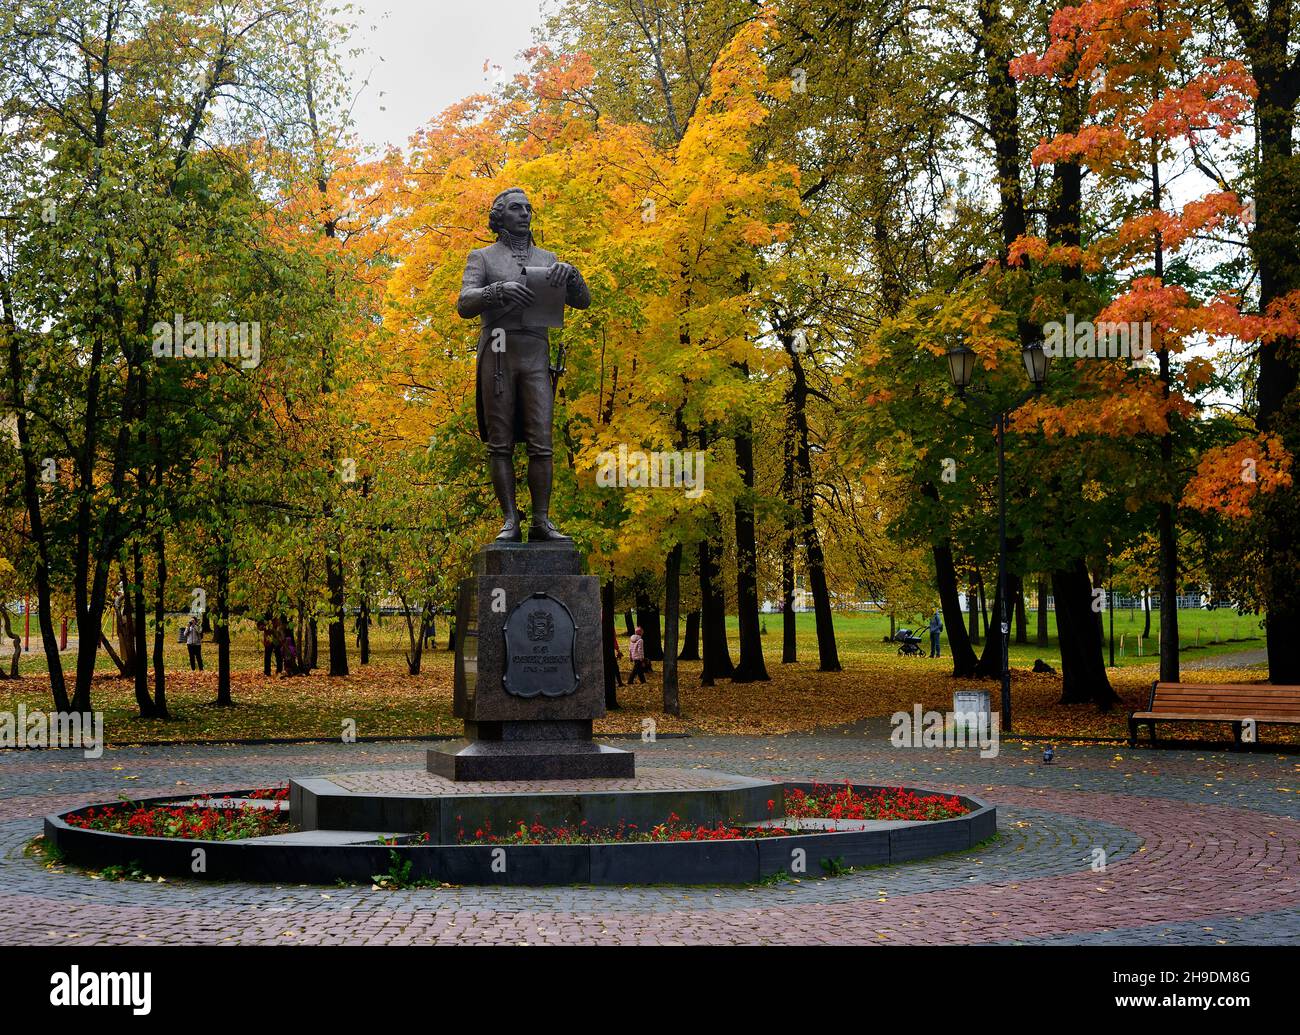 Petrozavodsk, Russia – September 19, 2021: monument to the Russian poet Gavriil Derzhavin of the 18th century in the park of the city Stock Photo